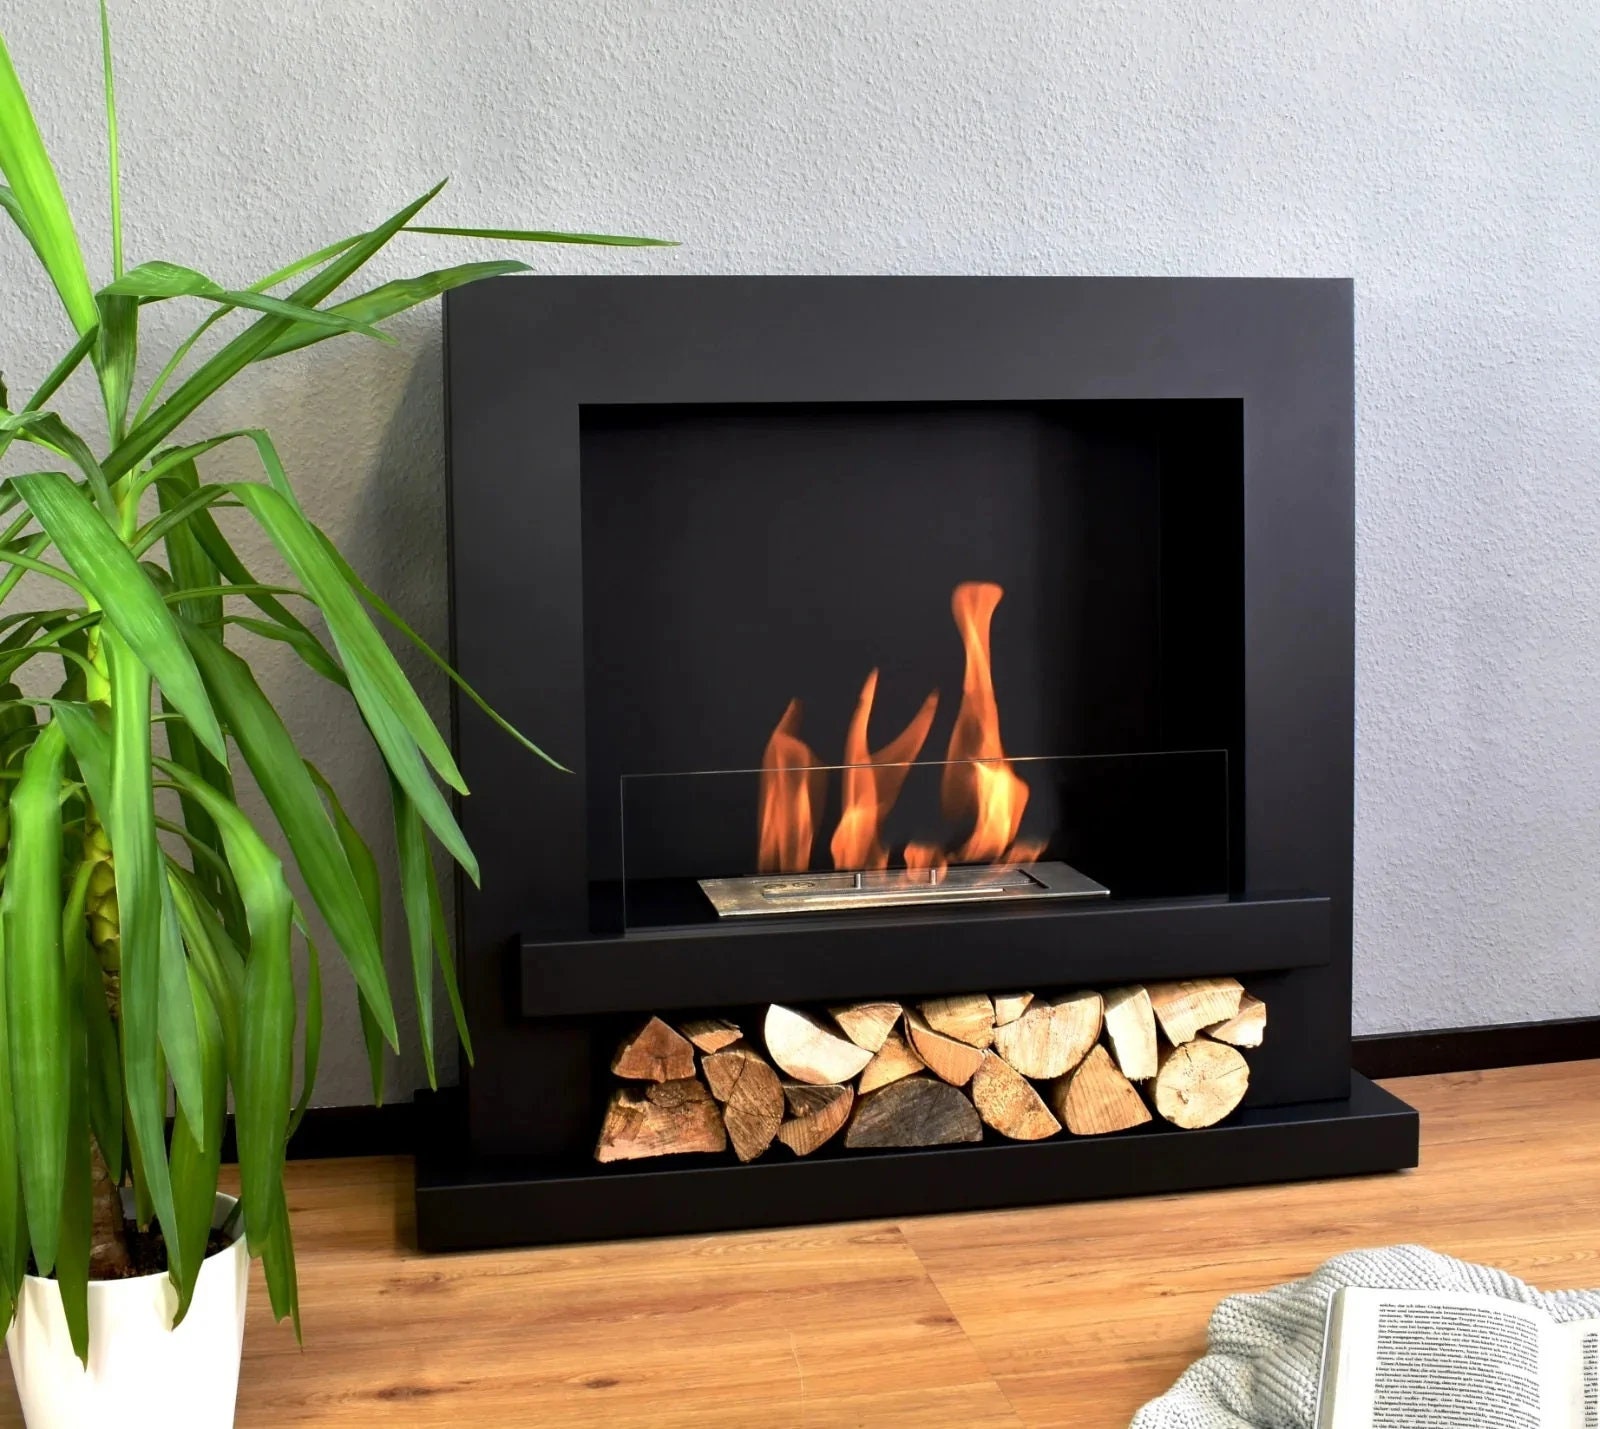 6 Bio-ethanol Fireplaces for Winter